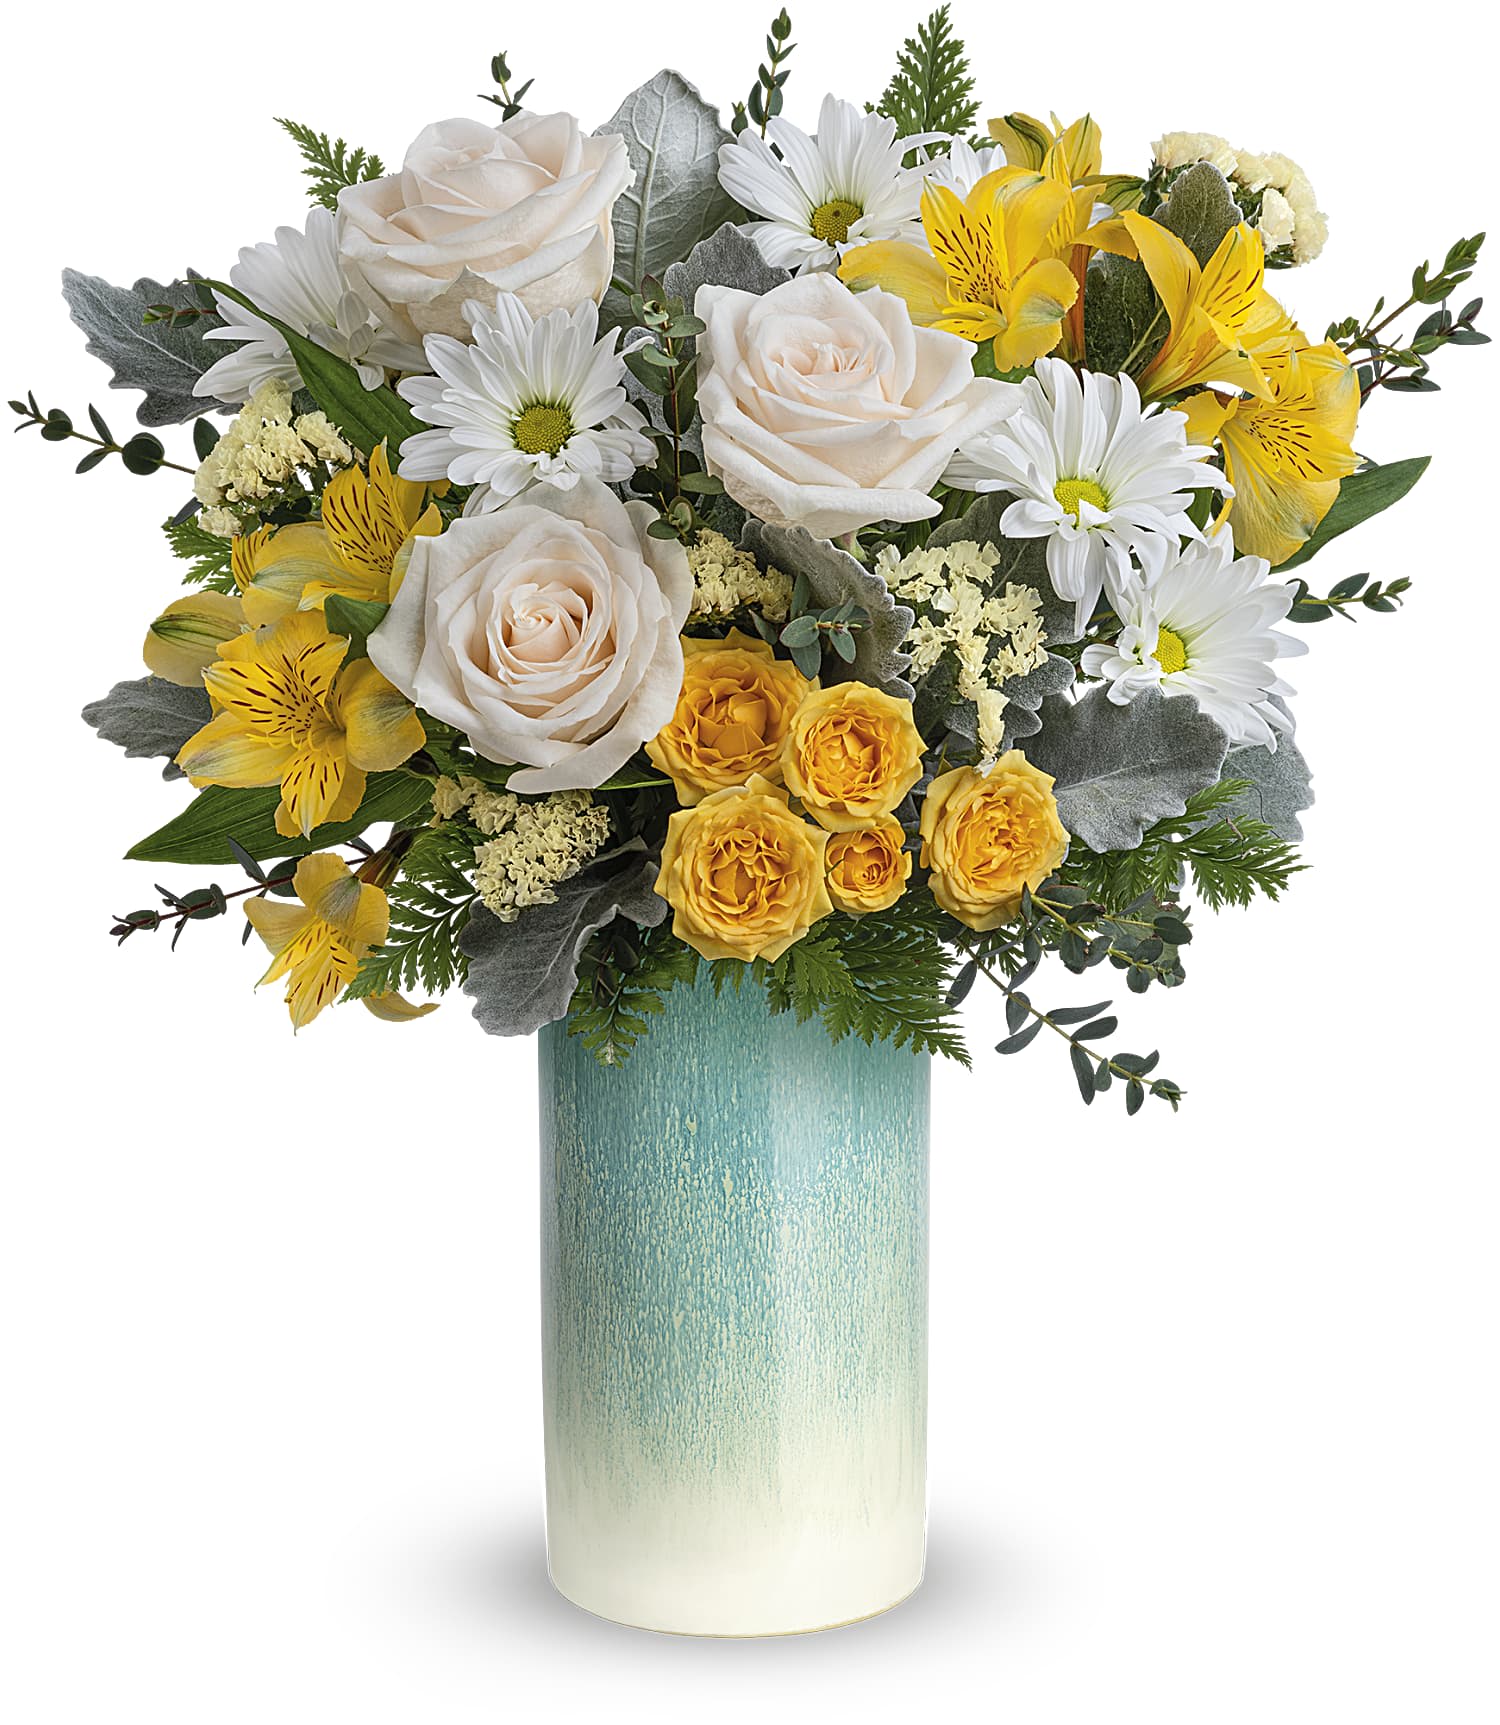 Sunshine Breeze - Resplendent as a sunny springtime sky, this glorious bouquet of yellow and white blooms is perfectly complemented by an aqua-glazed stoneware vase.  This arrangement includes crème roses, yellow spray roses, white daisy spray chrysanthemums, yellow alstroemeria, crème sinuata statice, parvifolia eucalyptus, dusty miller and leatherleaf fern. Delivered in Aqua Allure vase. Approximately 15 1/2&quot; W x 17&quot; H